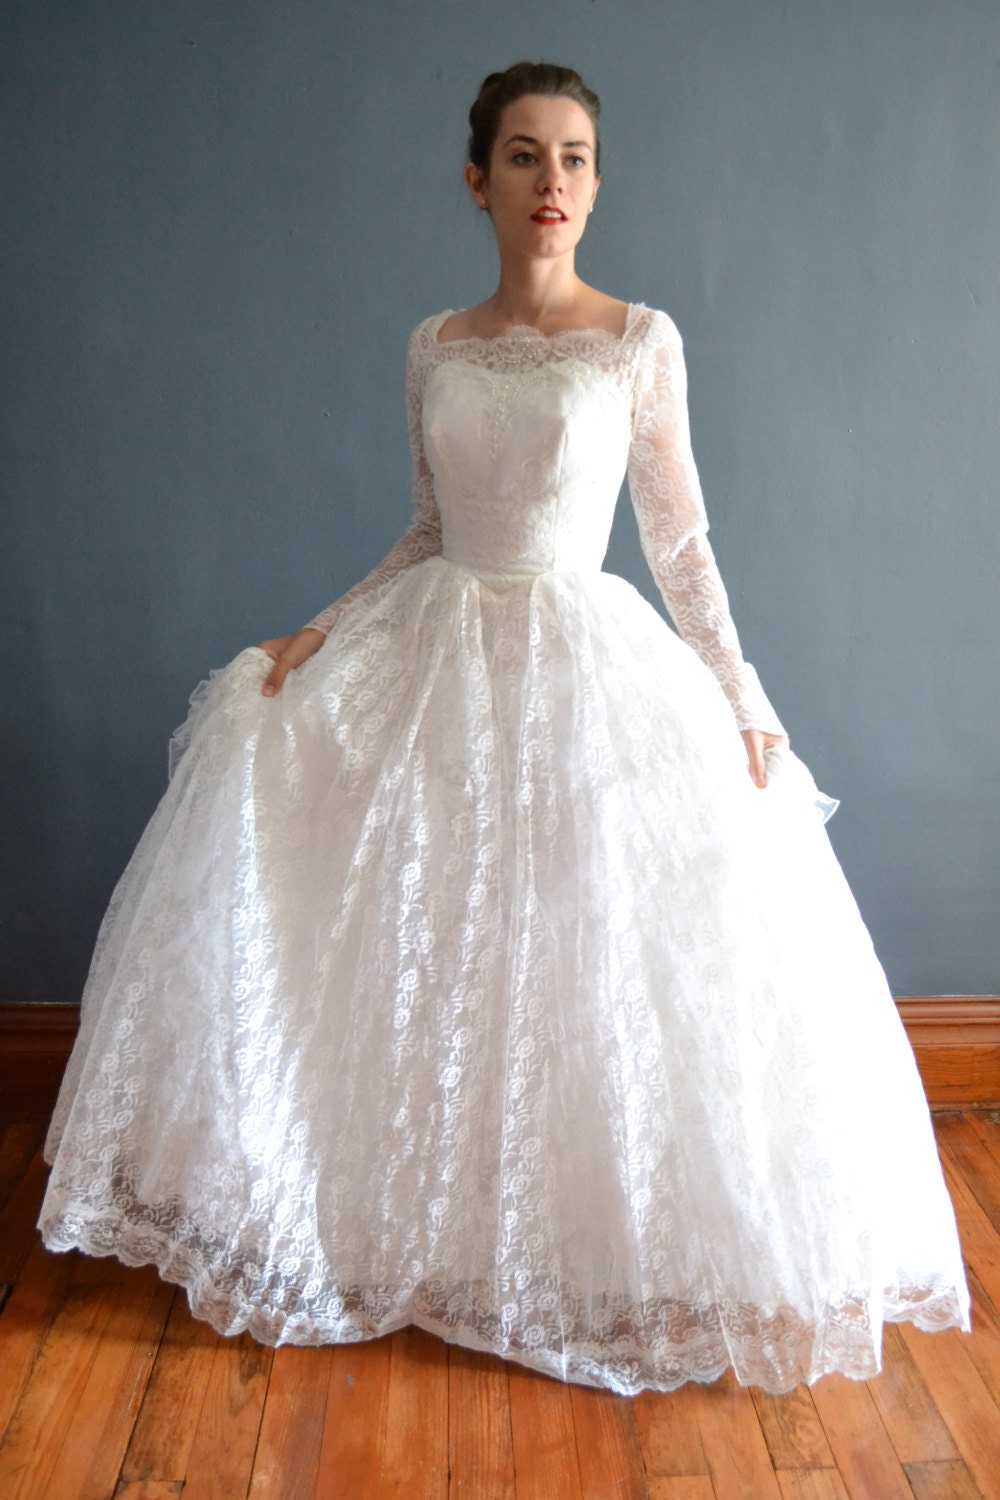 Vintage 50s Wedding Dresses Top Review - Find the Perfect Venue for ...